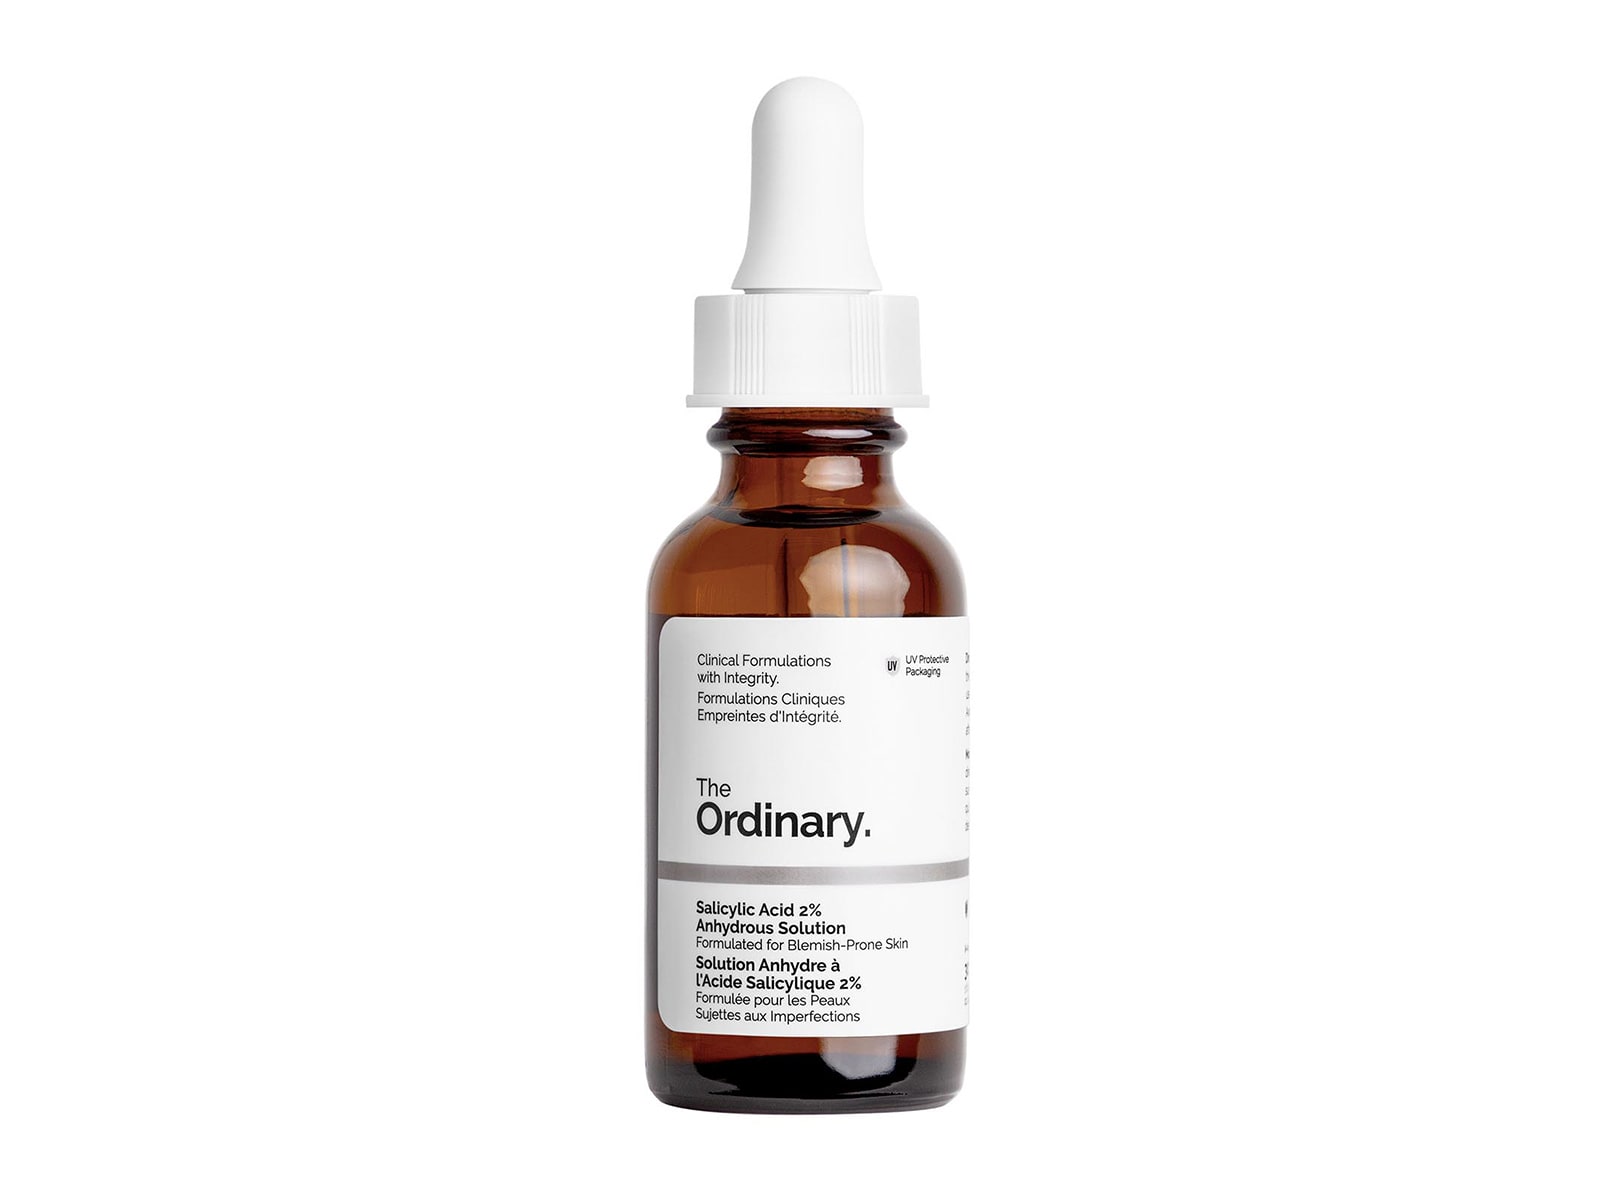 The Ordinary’s new Salicylic Acid 2% Anhydrous Solution, $9.58